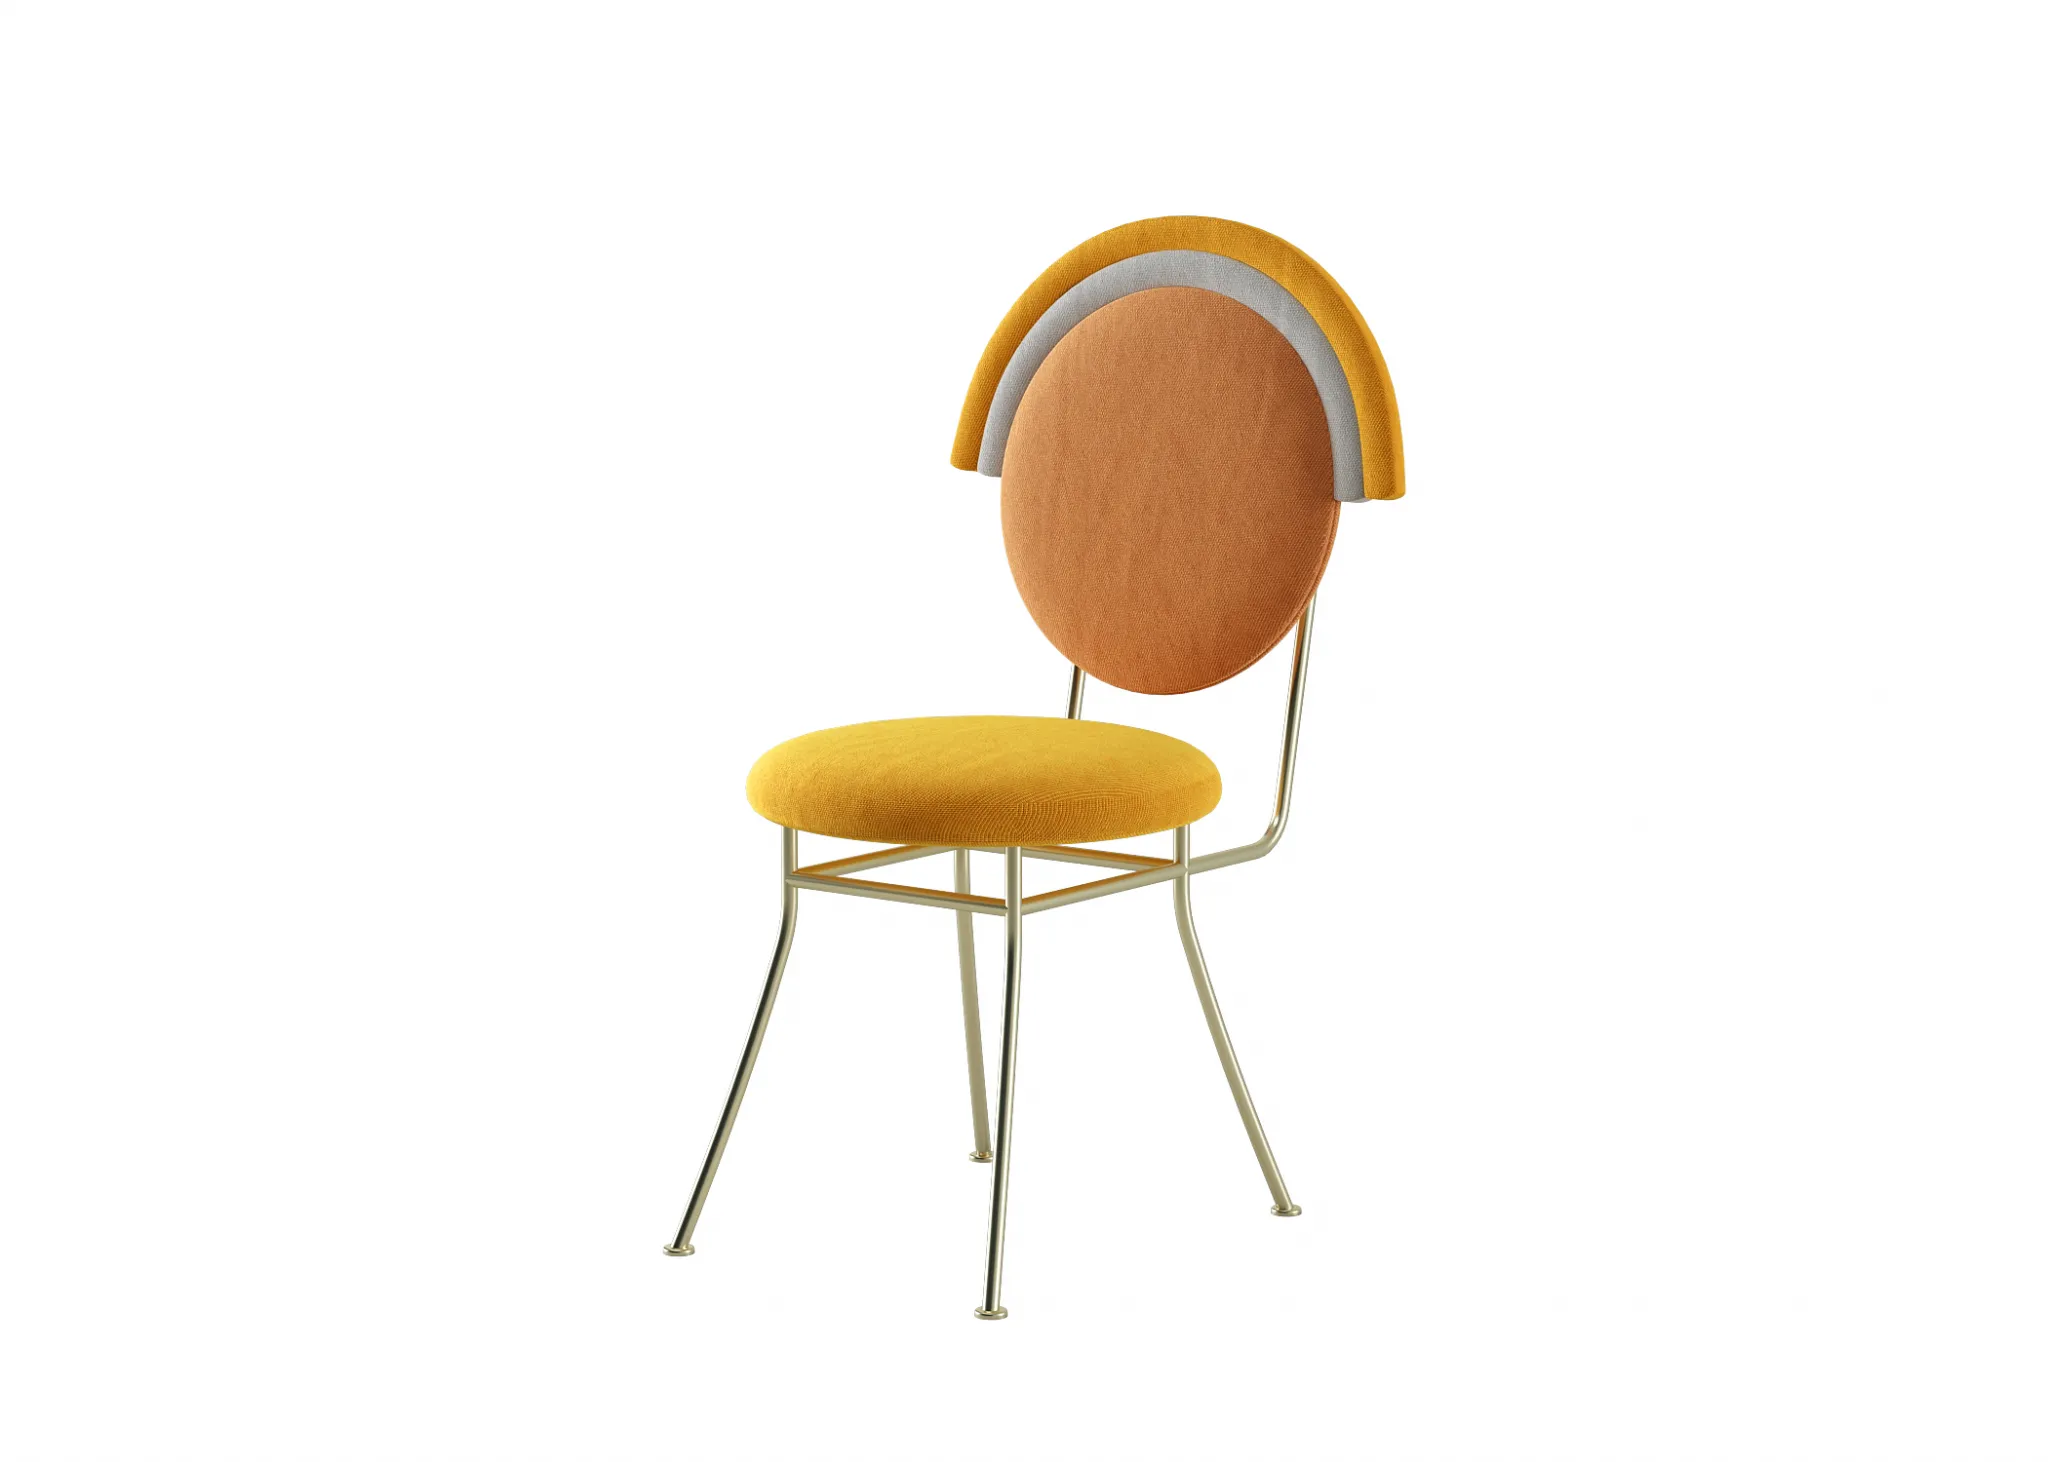 FURNITURE 3D MODELS – CHAIRS – 0115